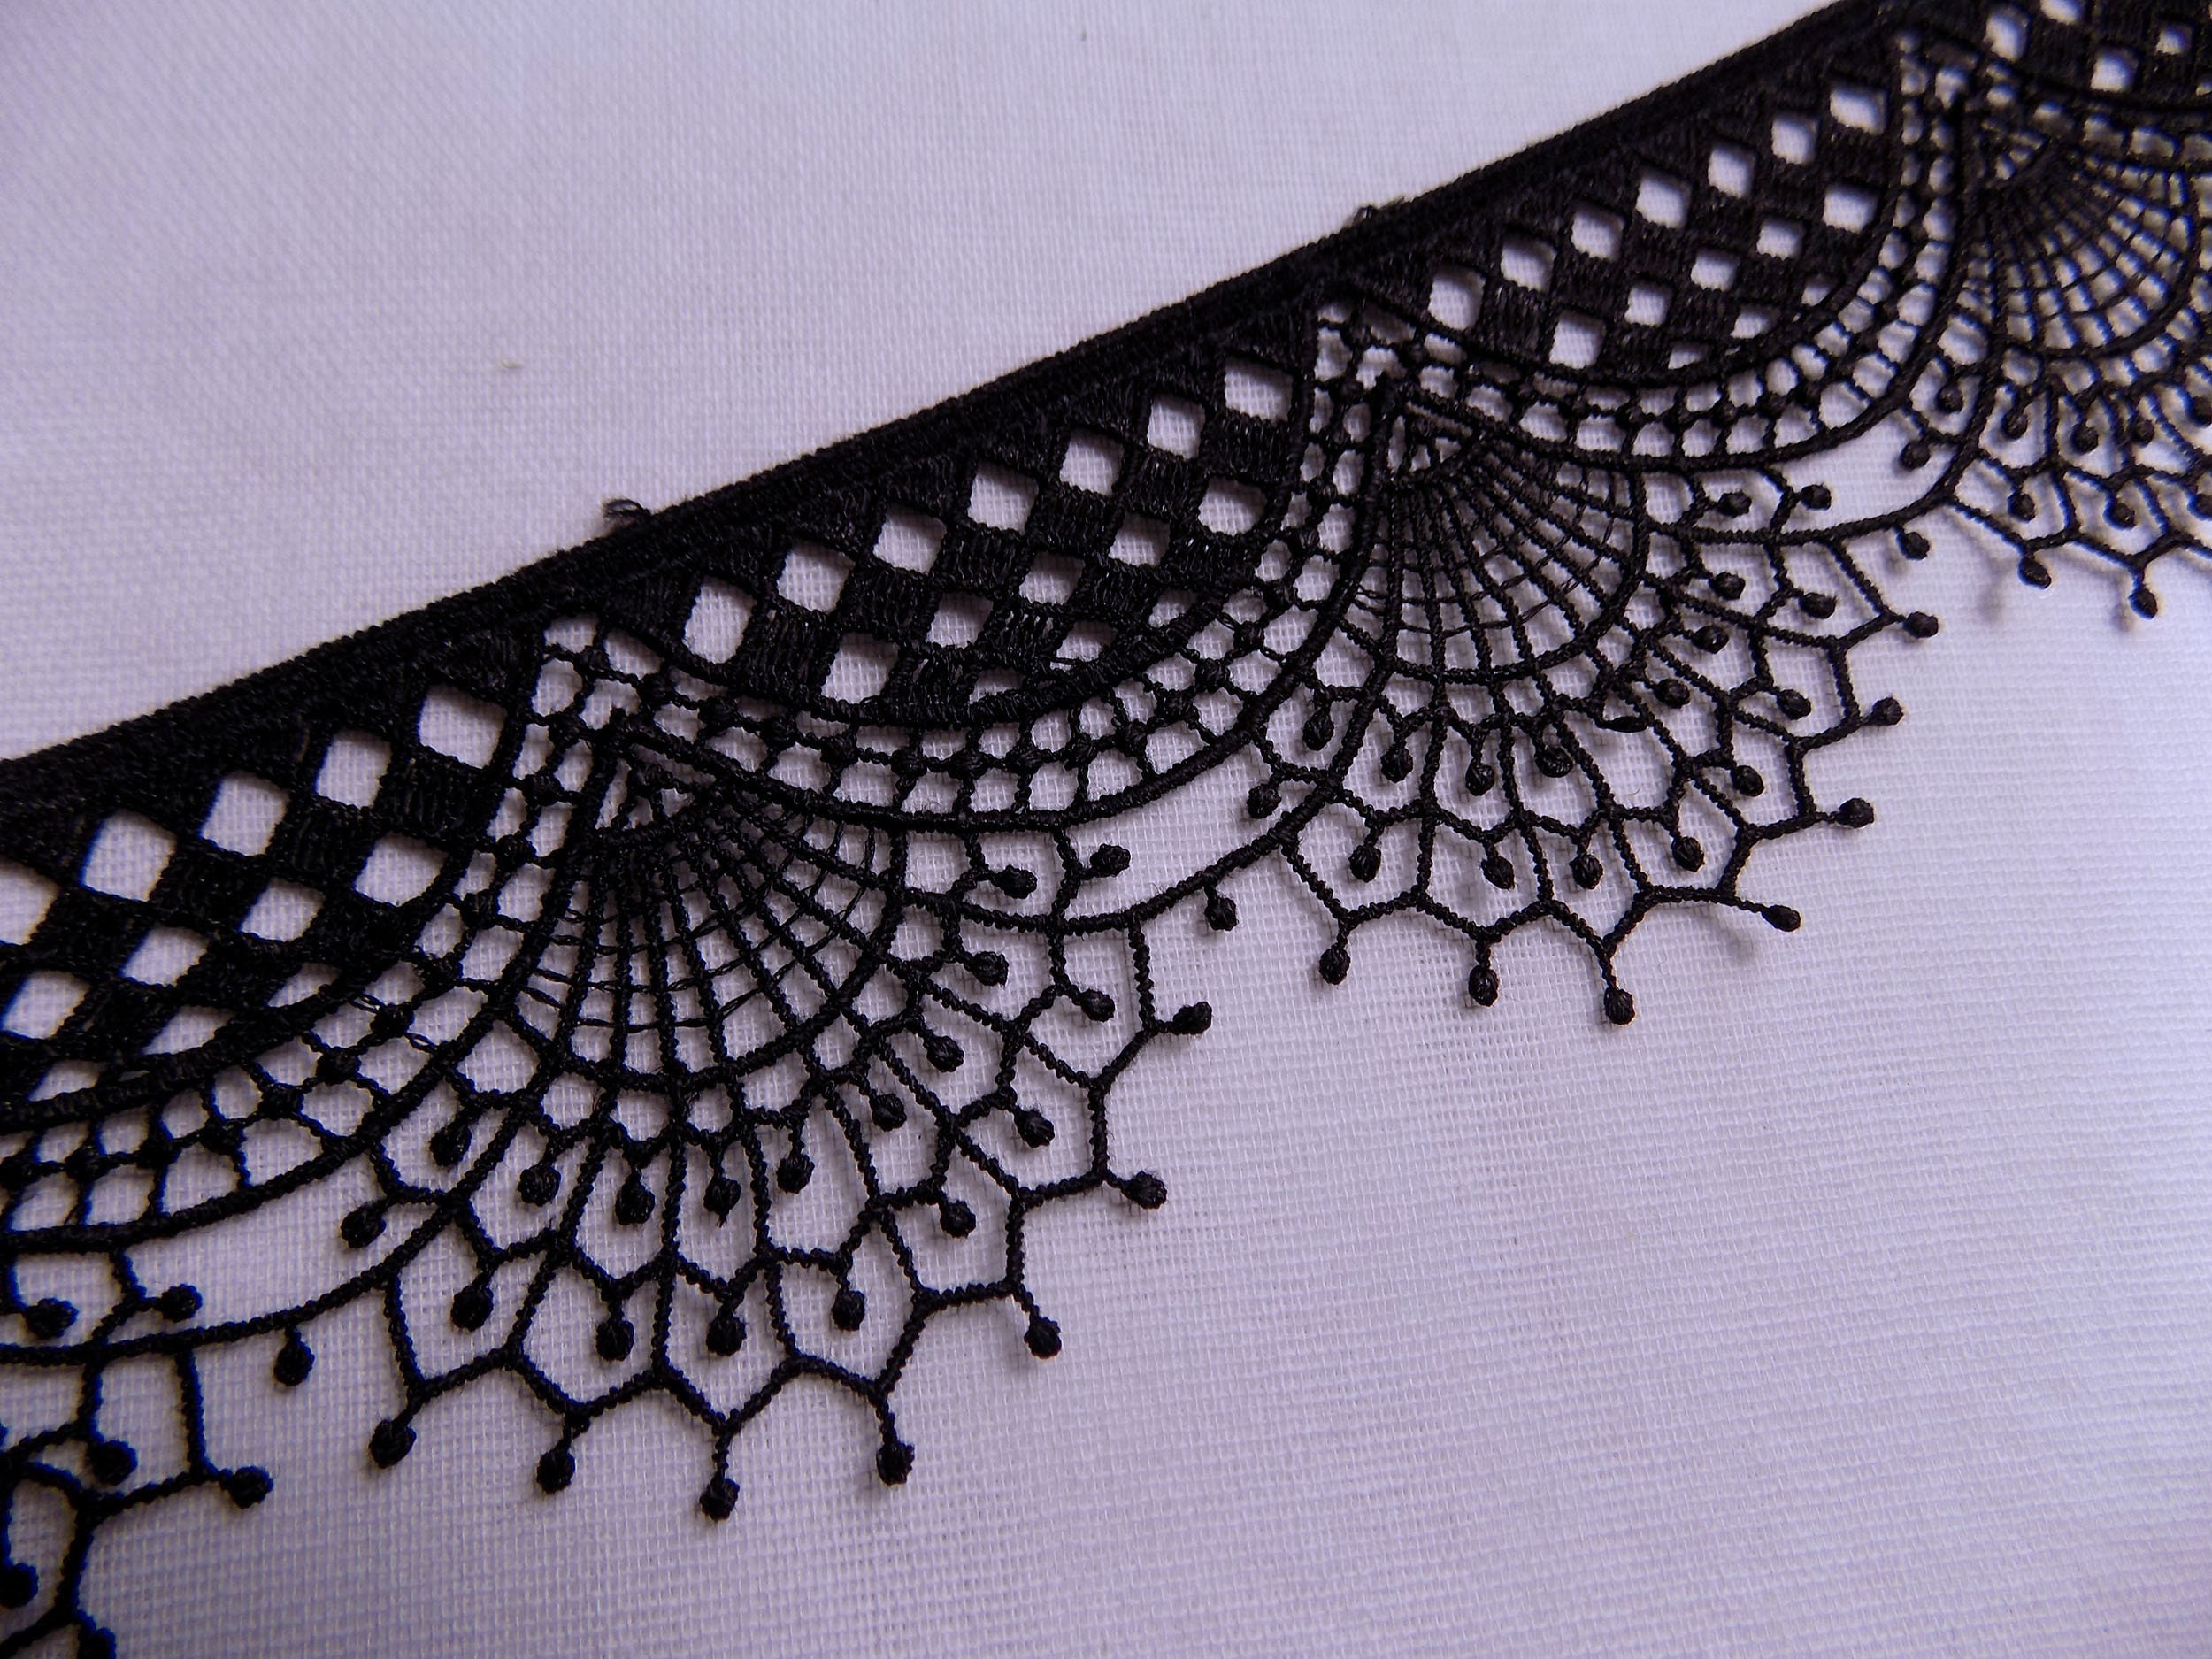 Black Venice Lace Trim by the Yard 55 Mm Cobweb Spider Lace - Etsy